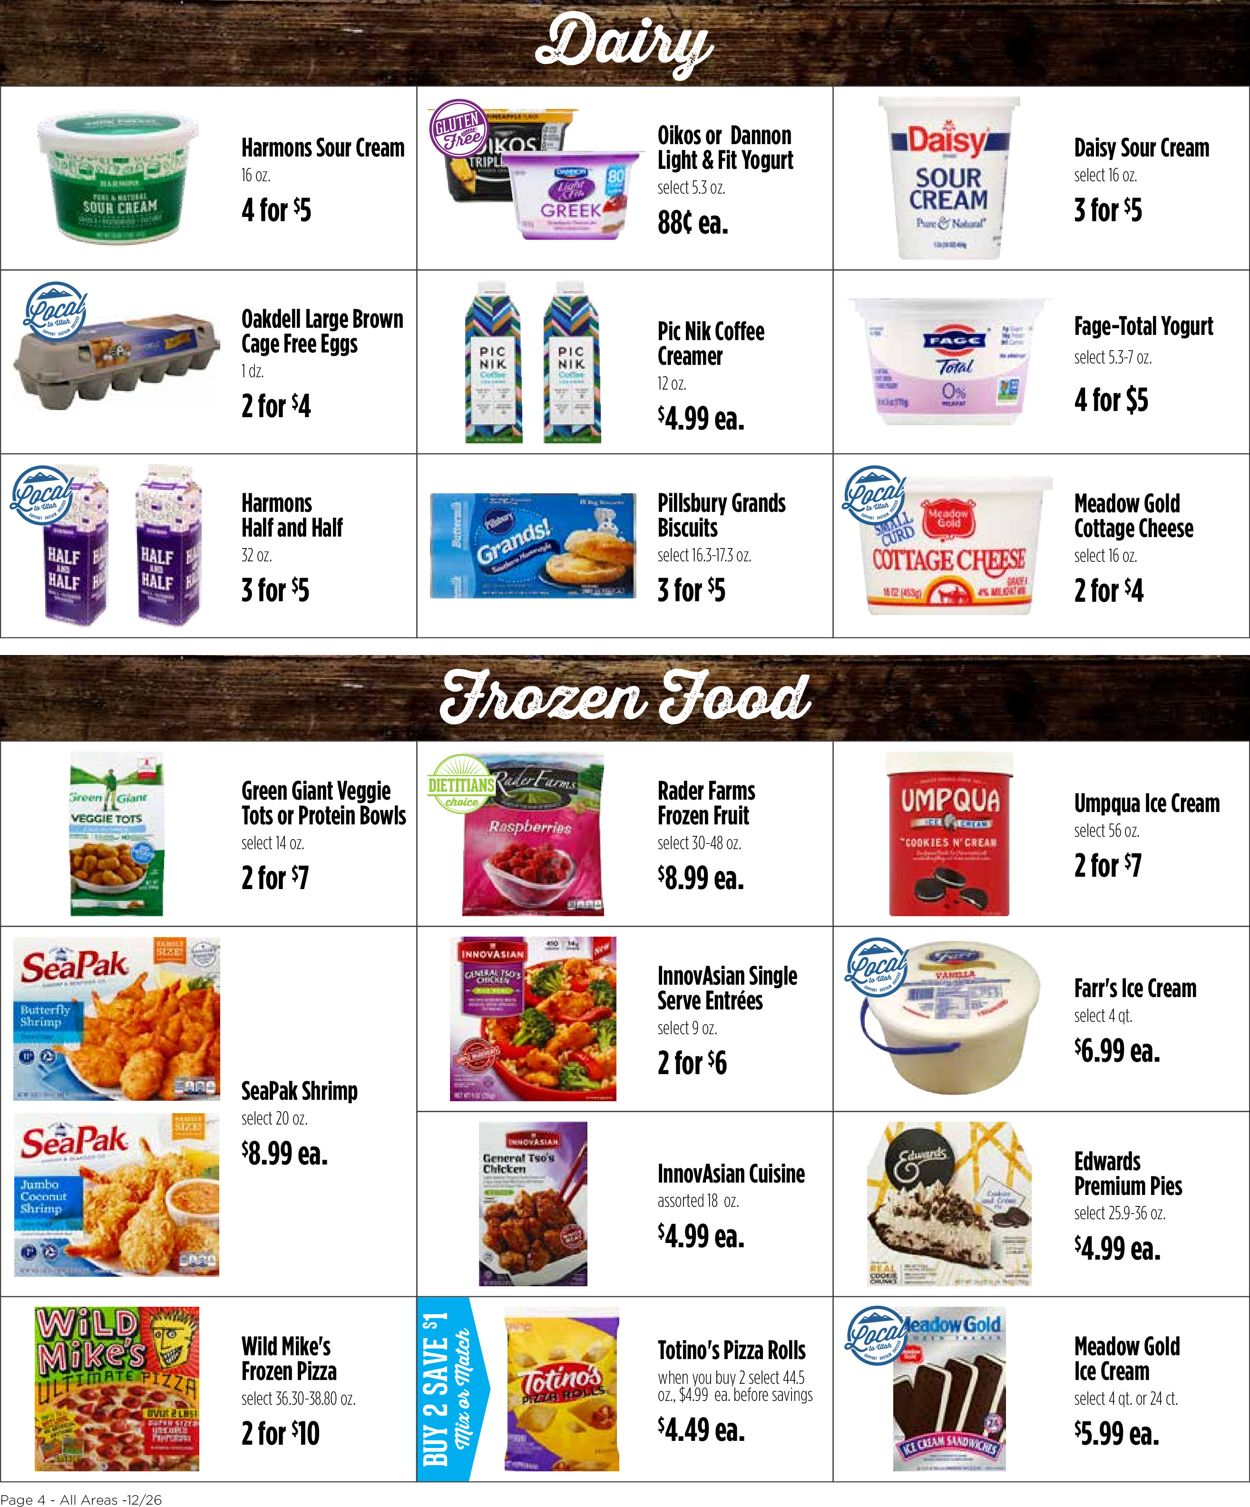 Catalogue Harmons - New Year's Ad 2019/2020 from 12/26/2019